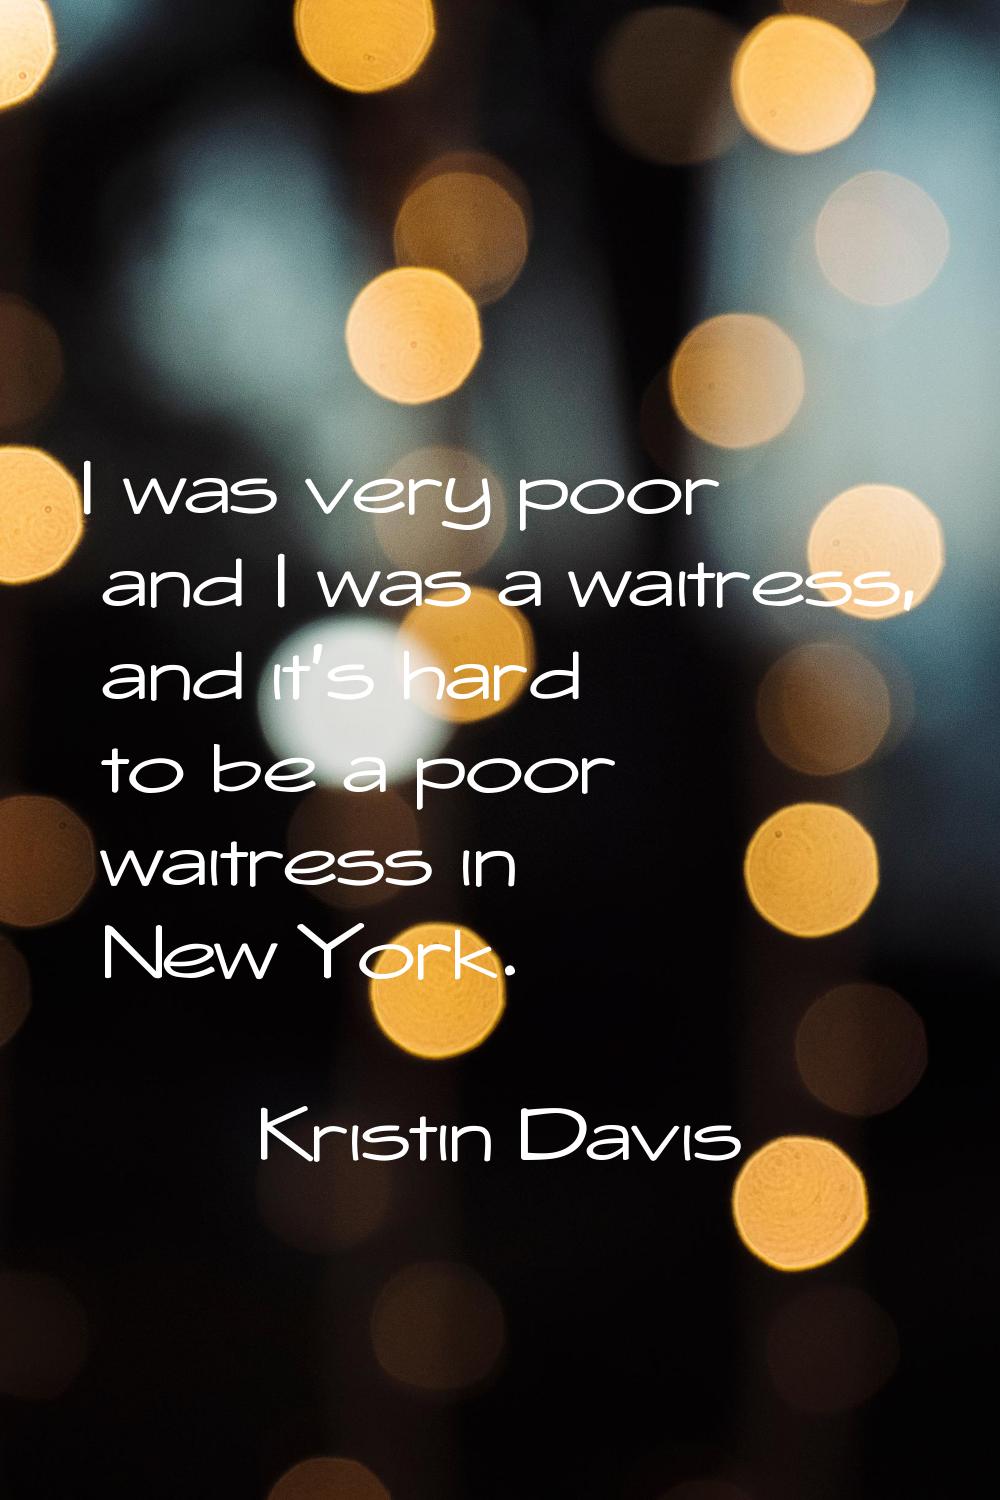 I was very poor and I was a waitress, and it's hard to be a poor waitress in New York.